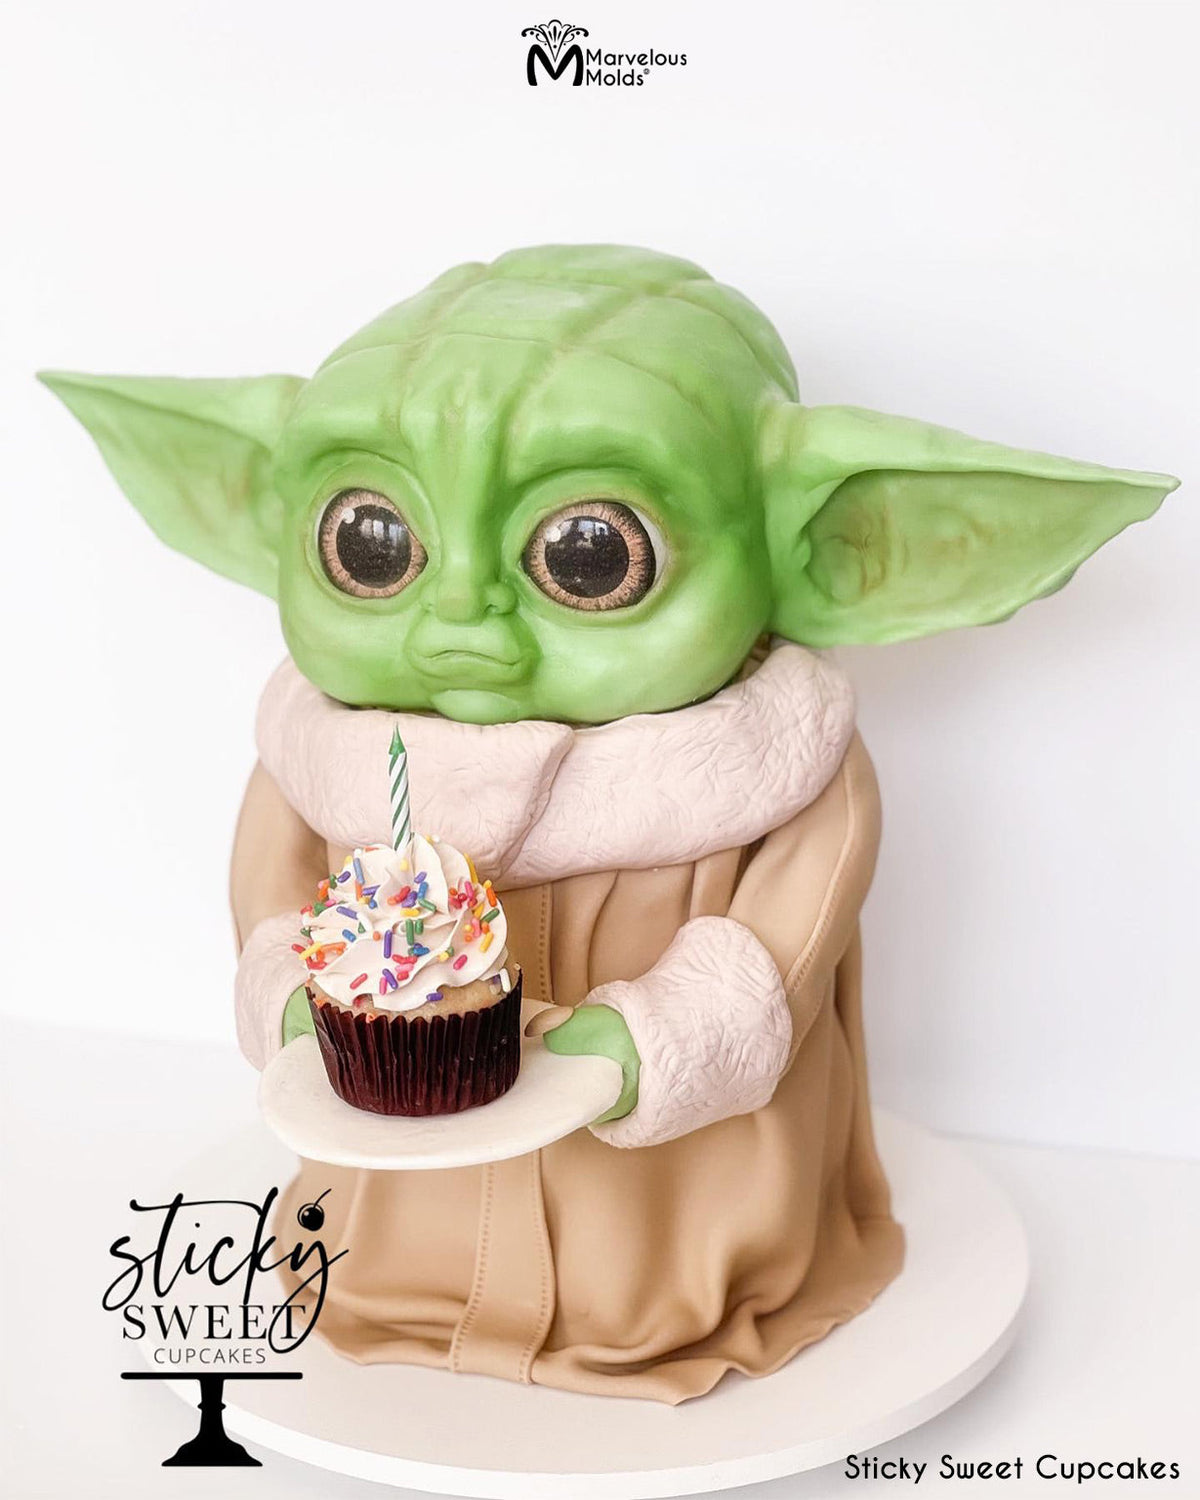 Star Wars Yoda Cake Decorated with Marvelous Molds Long Fur Silicone Impression Mat